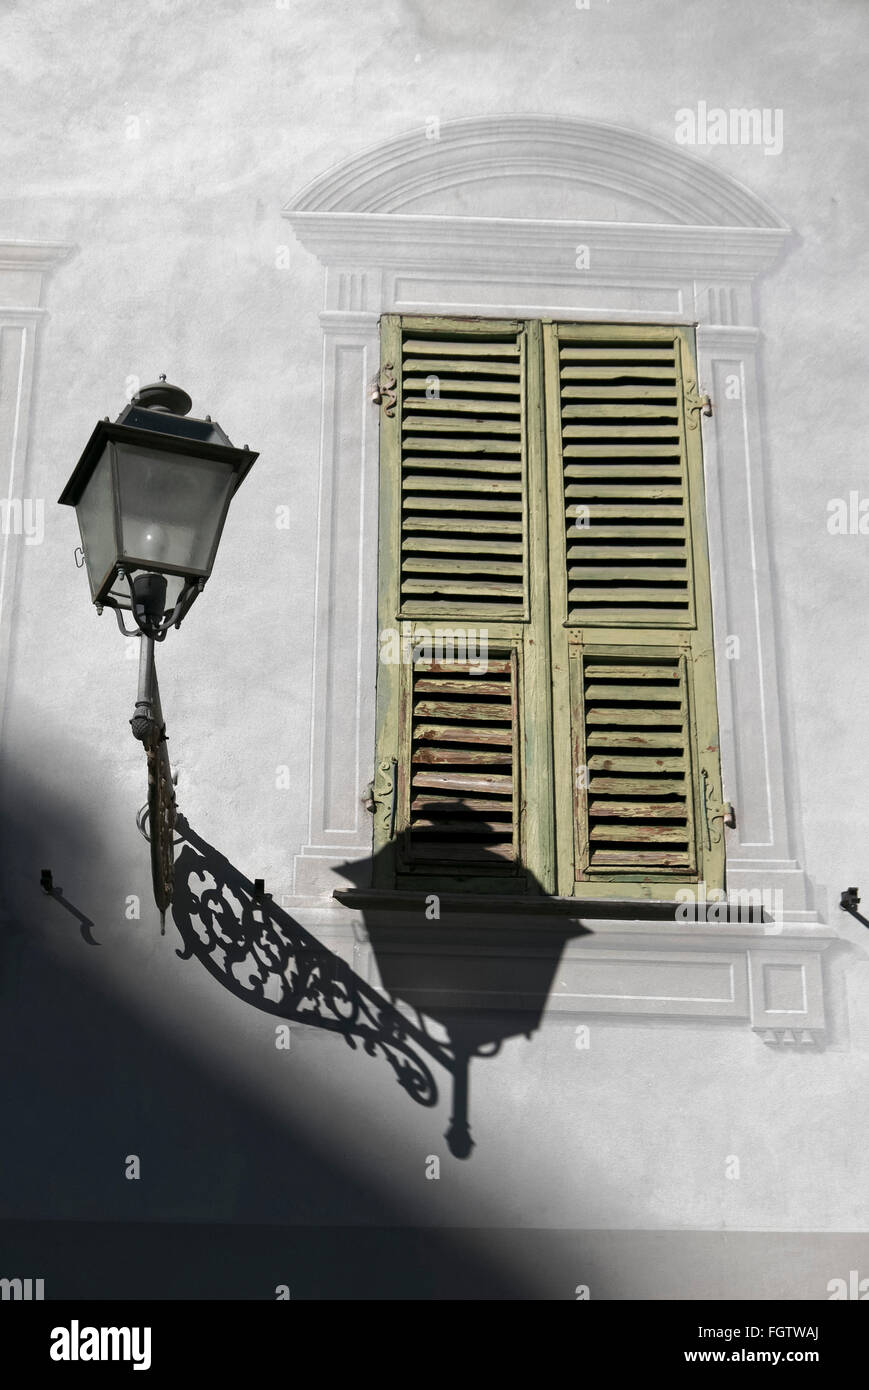 Laterne an Hauswand, Sanremo, Riviera, Ligurien, Italien | Lantern on house wall, Sanremo, Riviera, Liguria, Italy Stock Photo